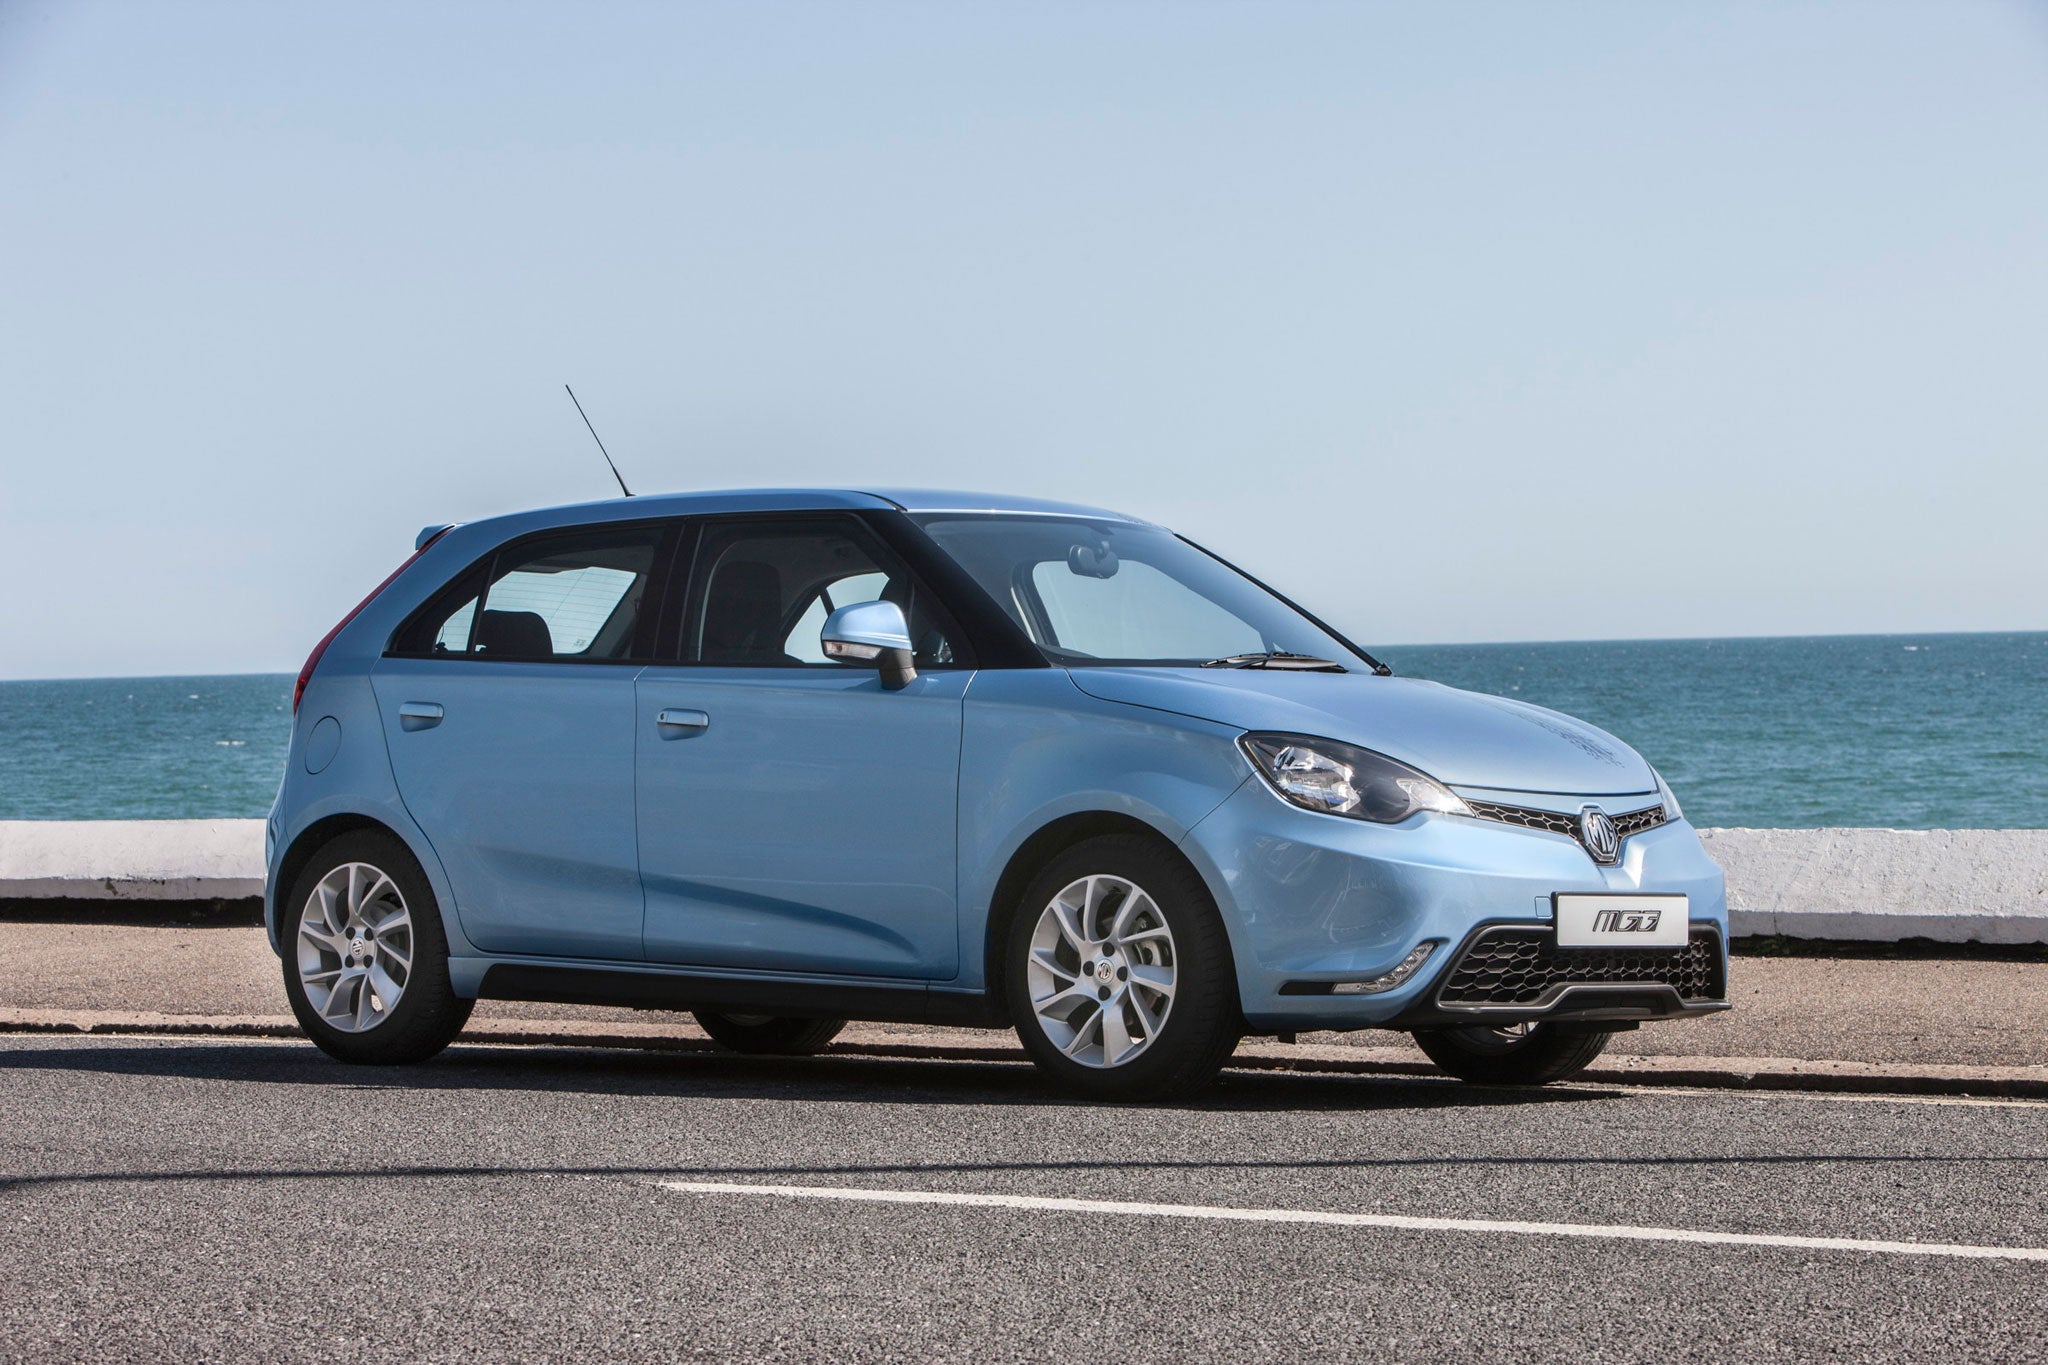 There is a precision, deftness and transparency to the MG3's responses that are rare in a new, mass-market model